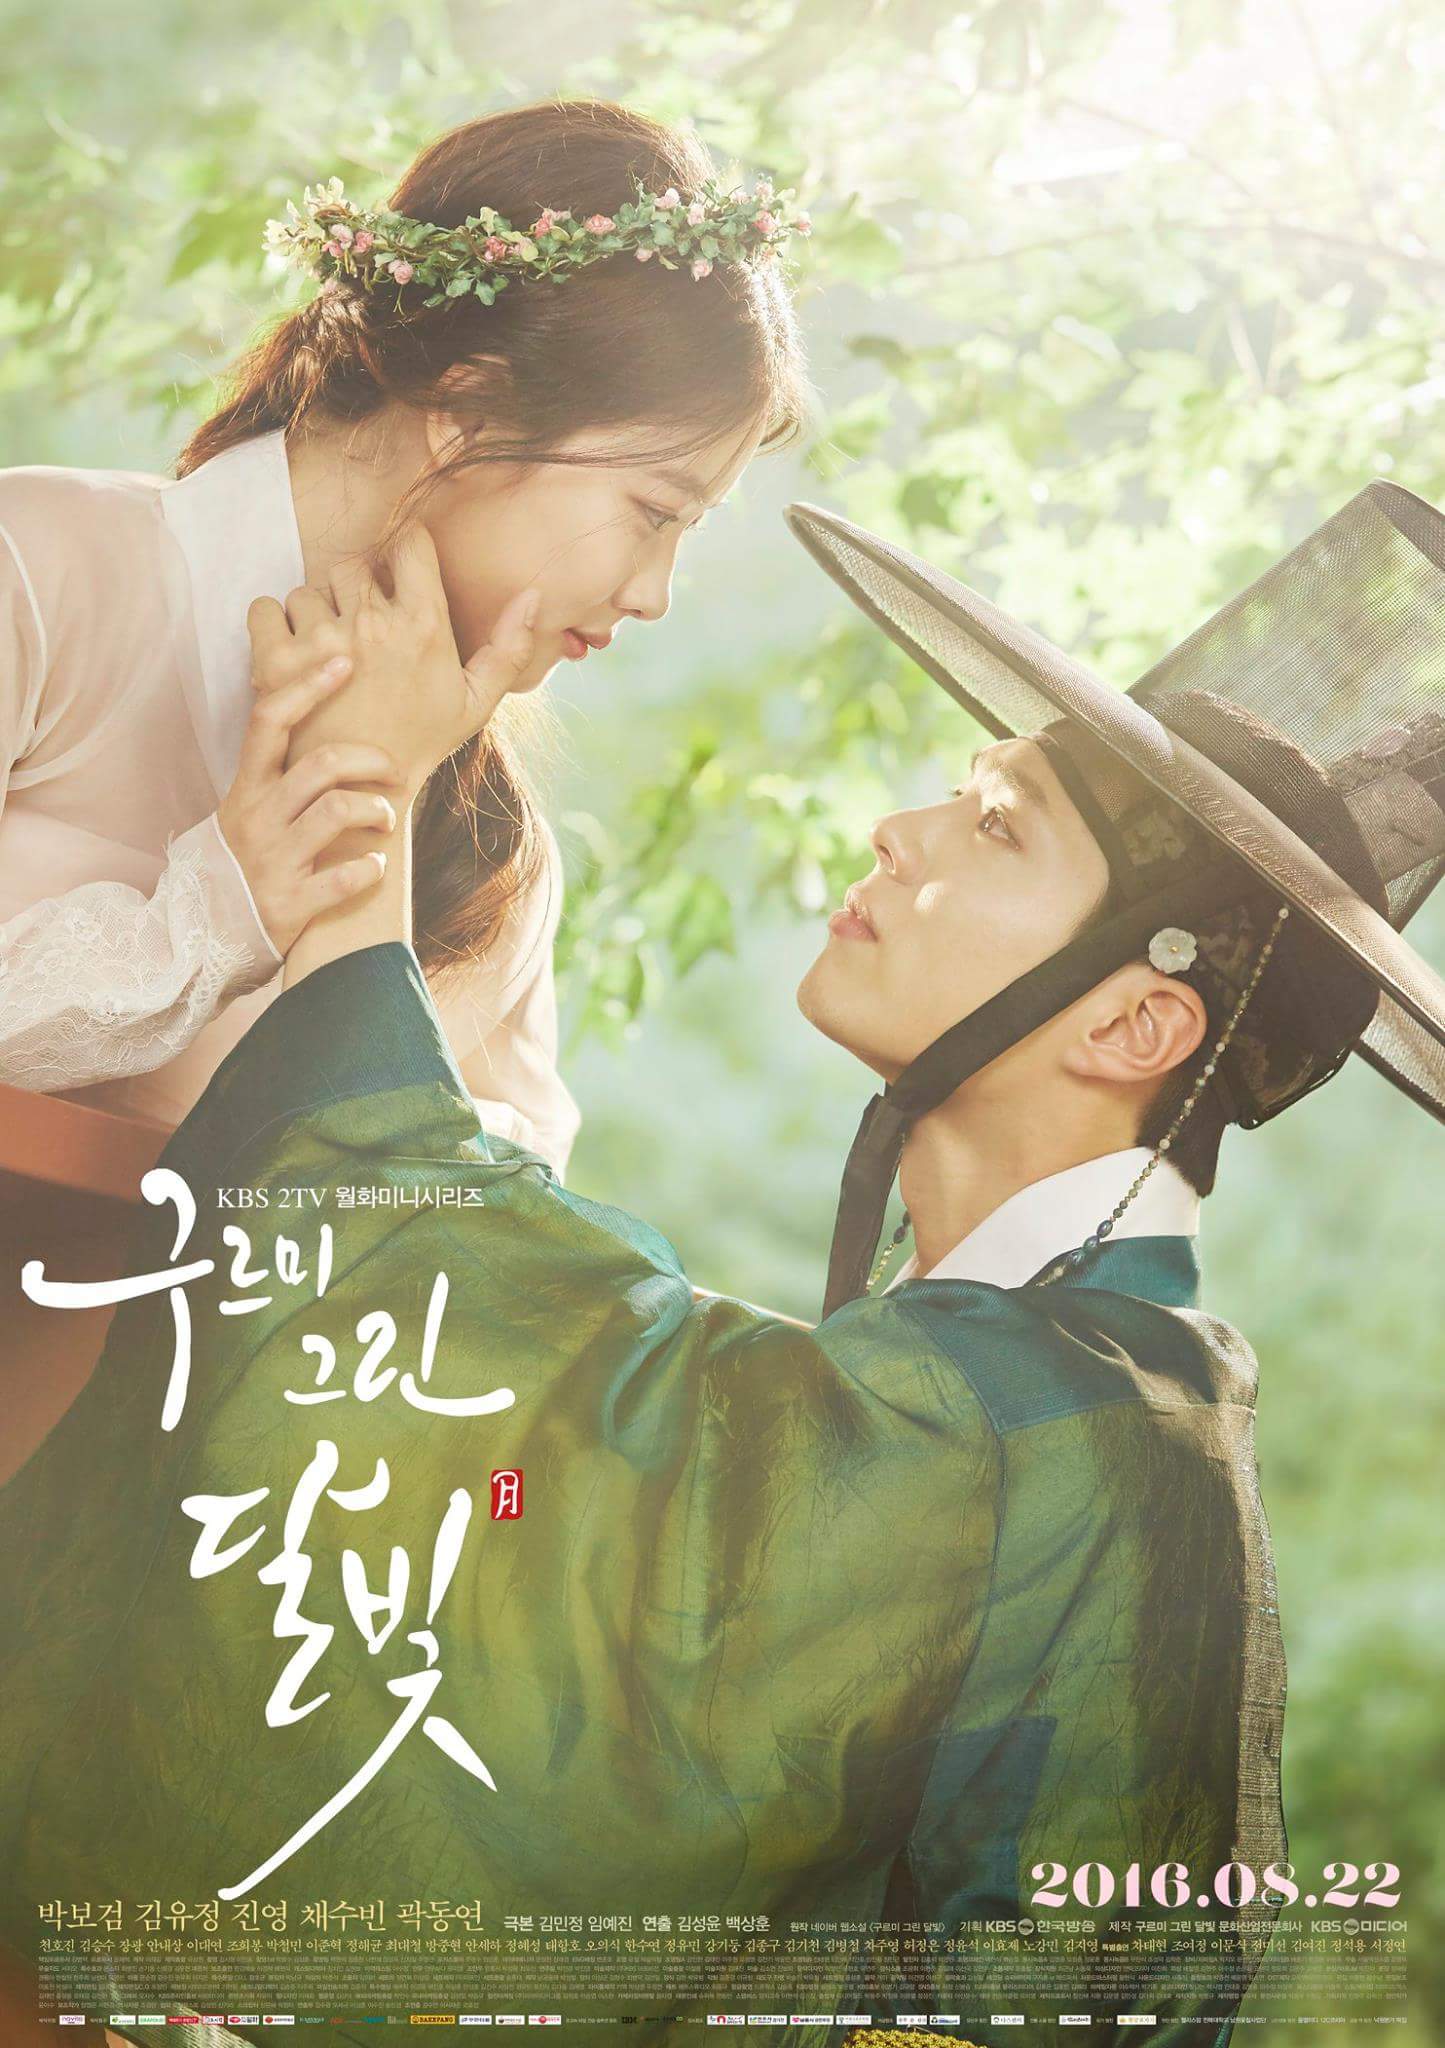 Moonlight Drawn By Clouds Drama KPOP Image Board